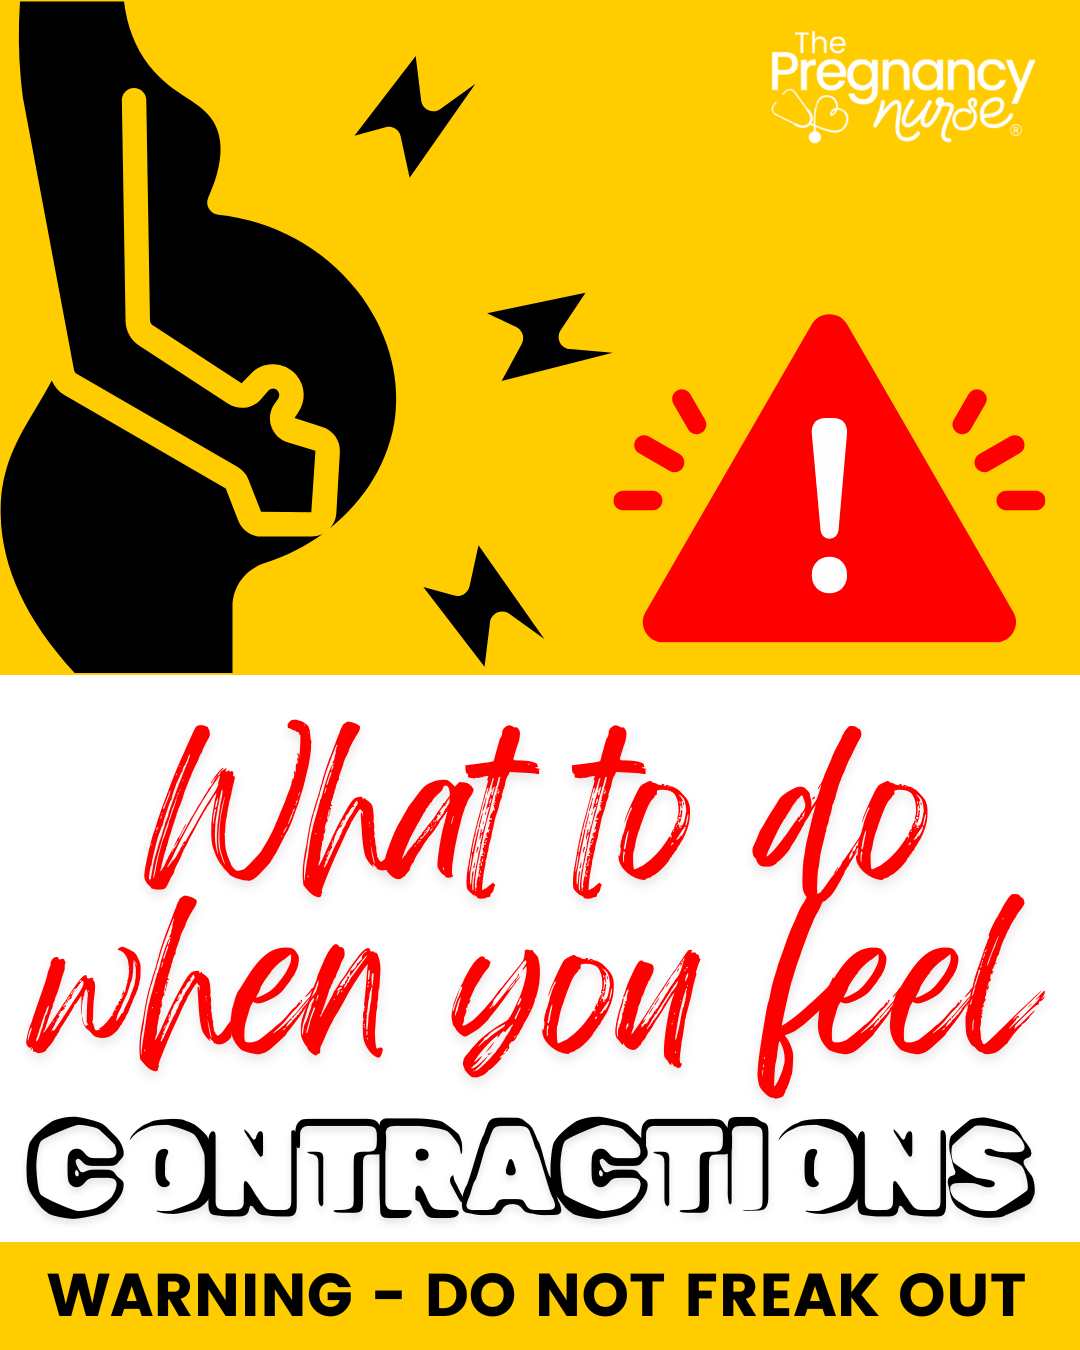 Is it time? Or, not yet? Contractions can be puzzling. Unravel the mystery with us as we share some vital tips on what to do when contractions hit. Stay calm, monitor, and act smart. Click through for more!